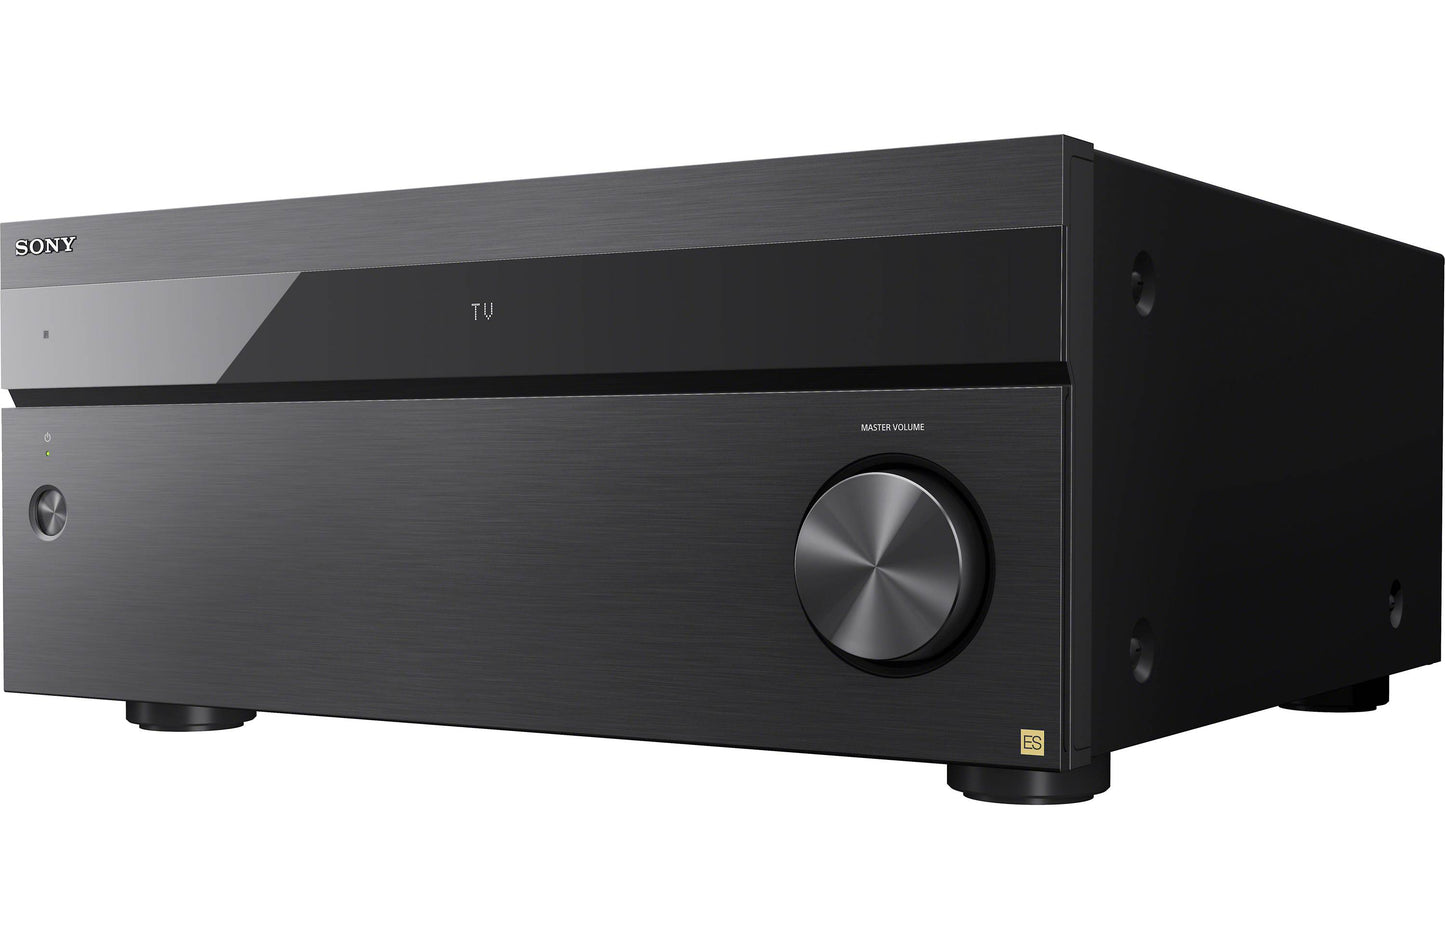 Sony ES STR-AZ7000ES 13.2-Channel Home Theater Receiver with Dolby Atmos